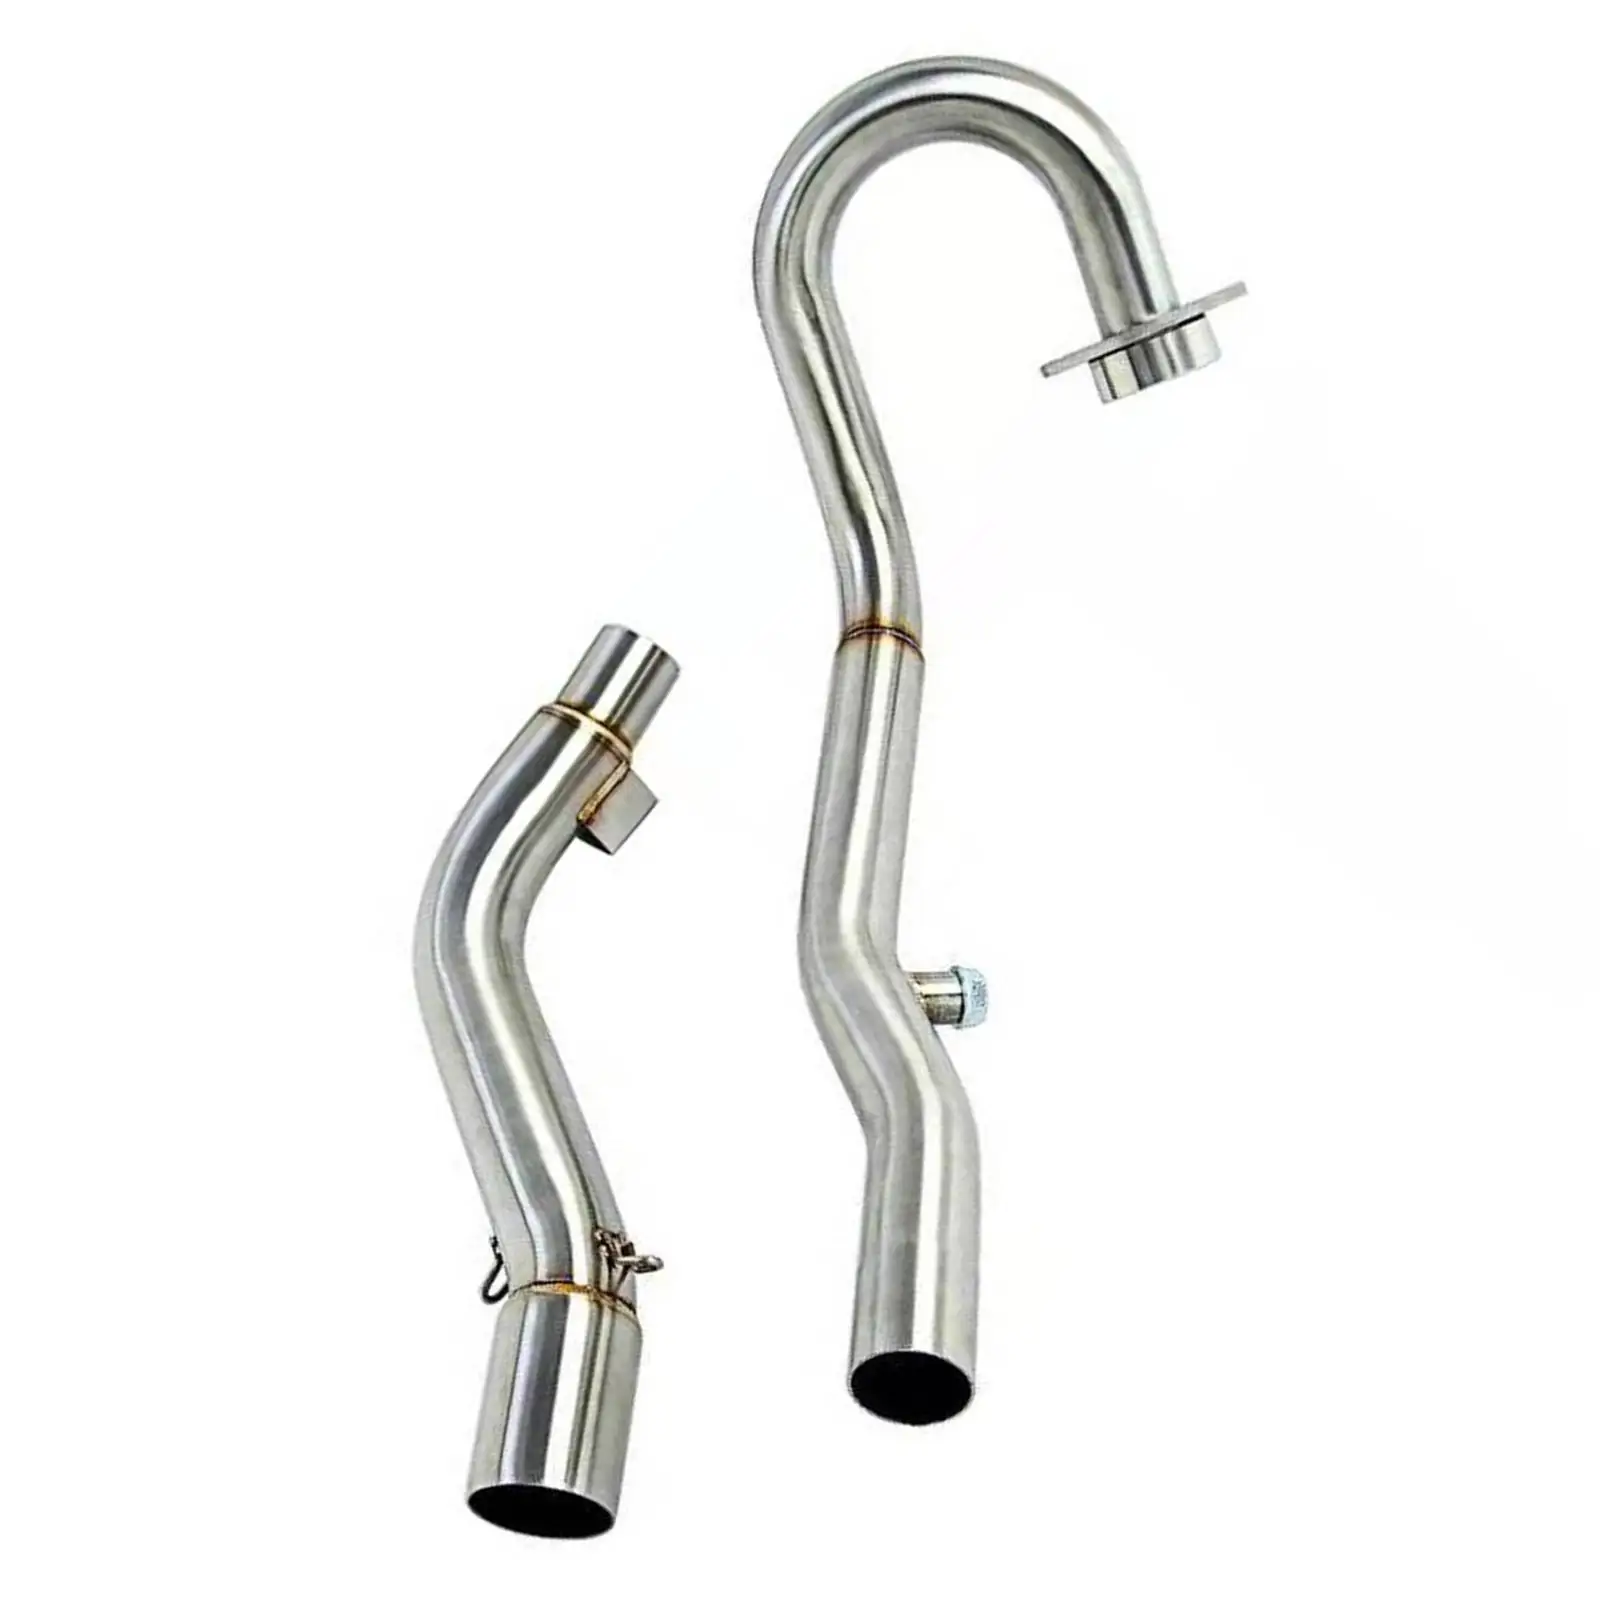 Motorcycle Exhaust Header Mid Pipe Mid?for Crf250L